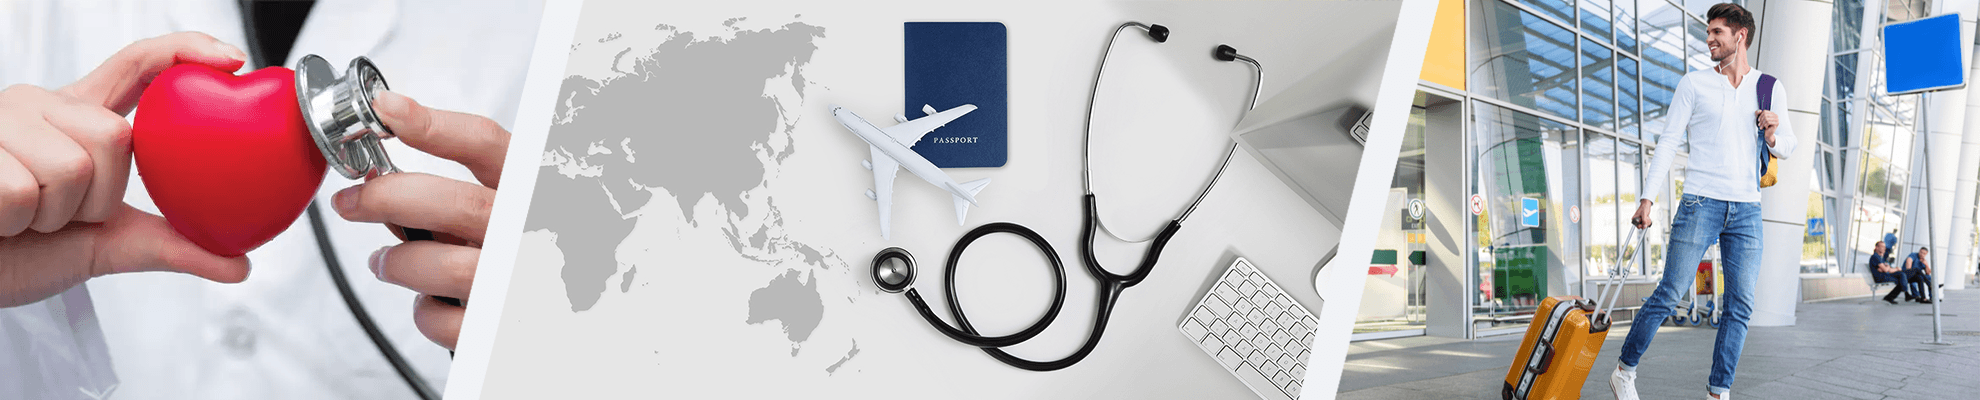 Medical Tourism Insurance with Axa banner